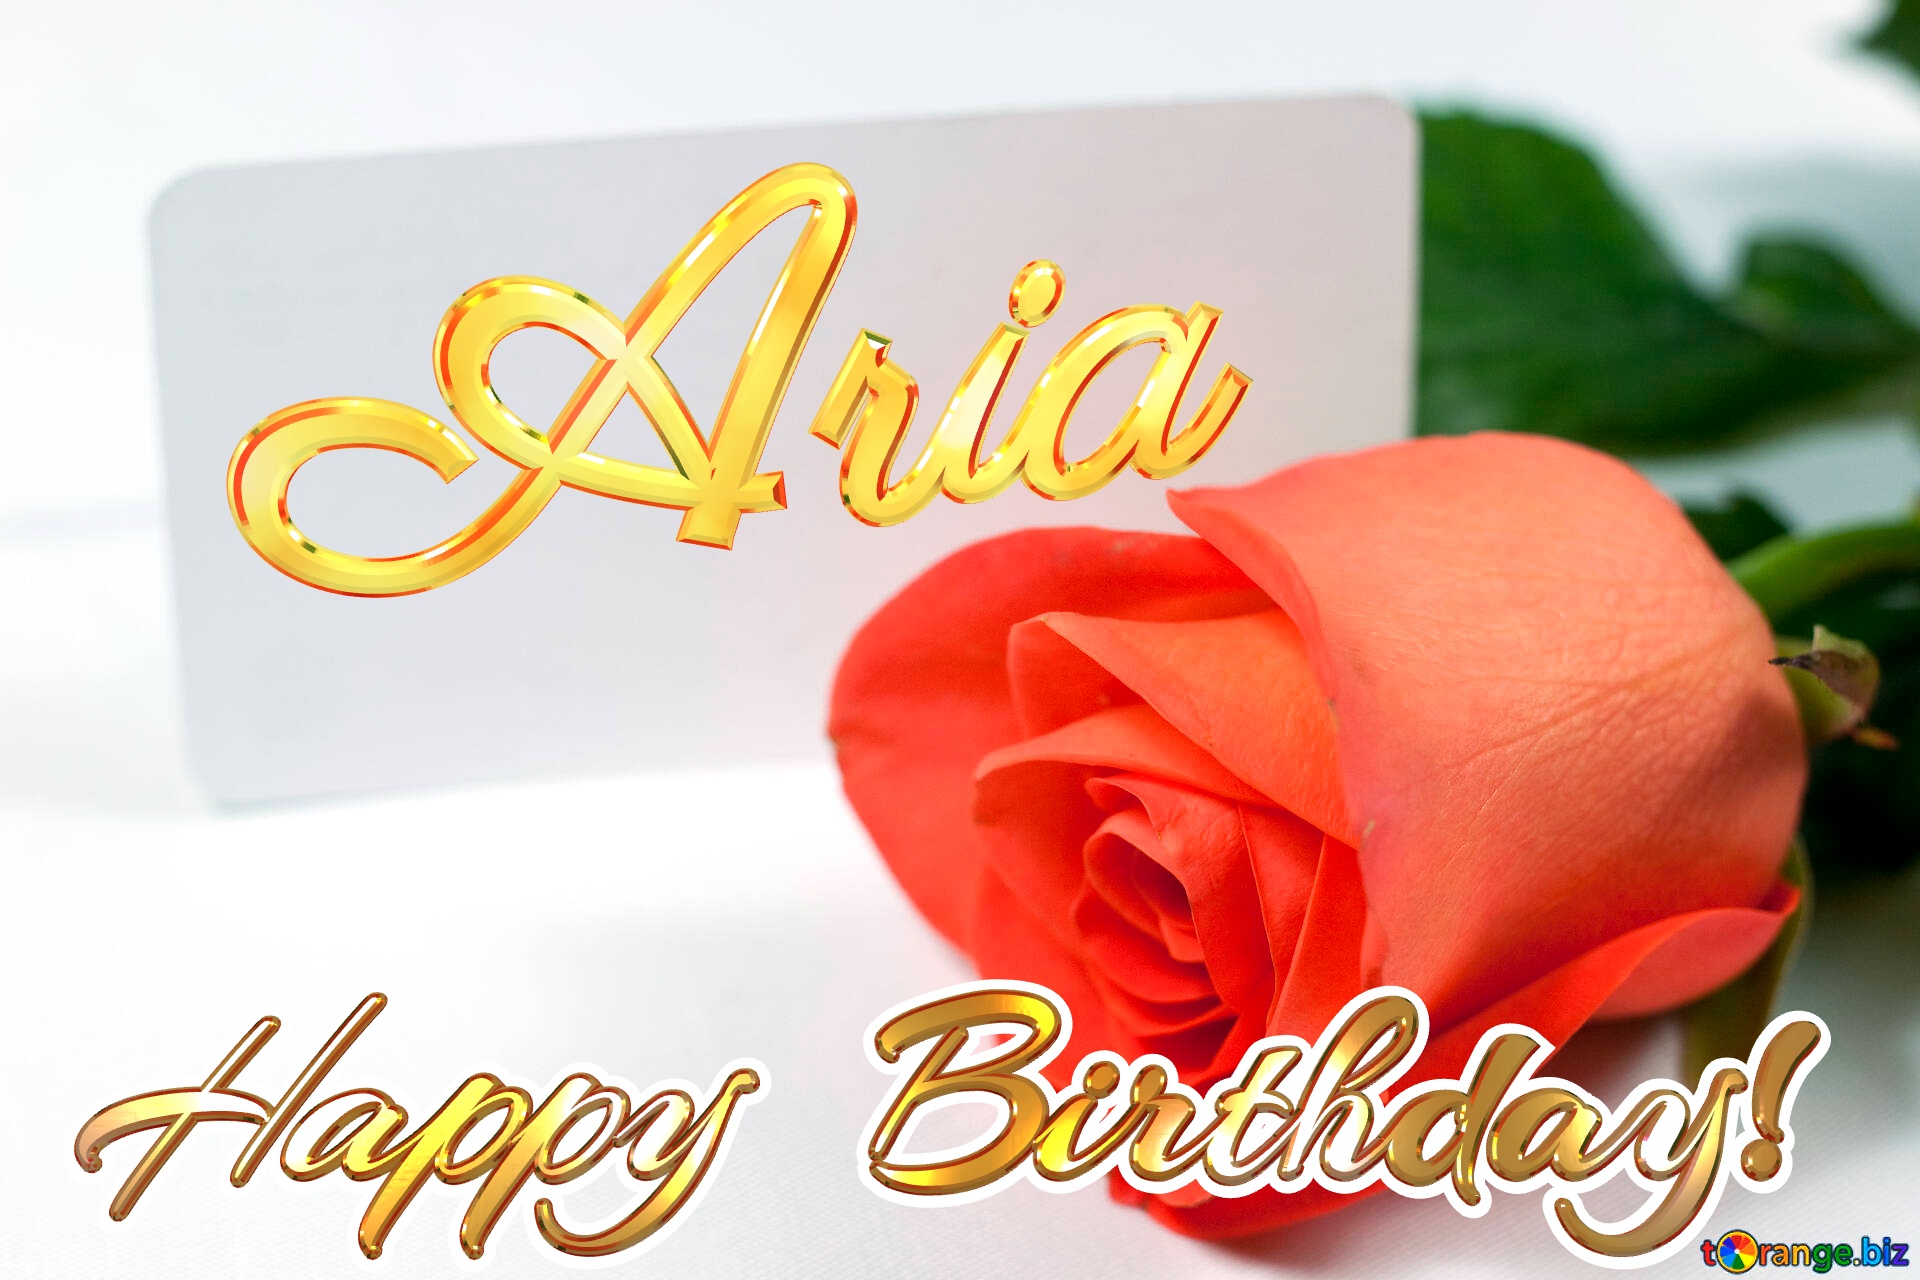 Happy  Birthday! Aria  Rosa   business card . On  White  background. №7233